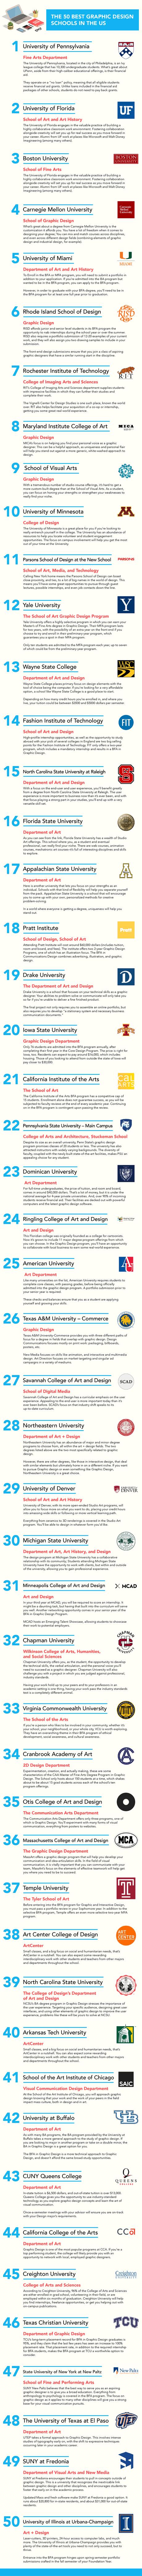 Our 50 Favorite Web Design Colleges for New Designers